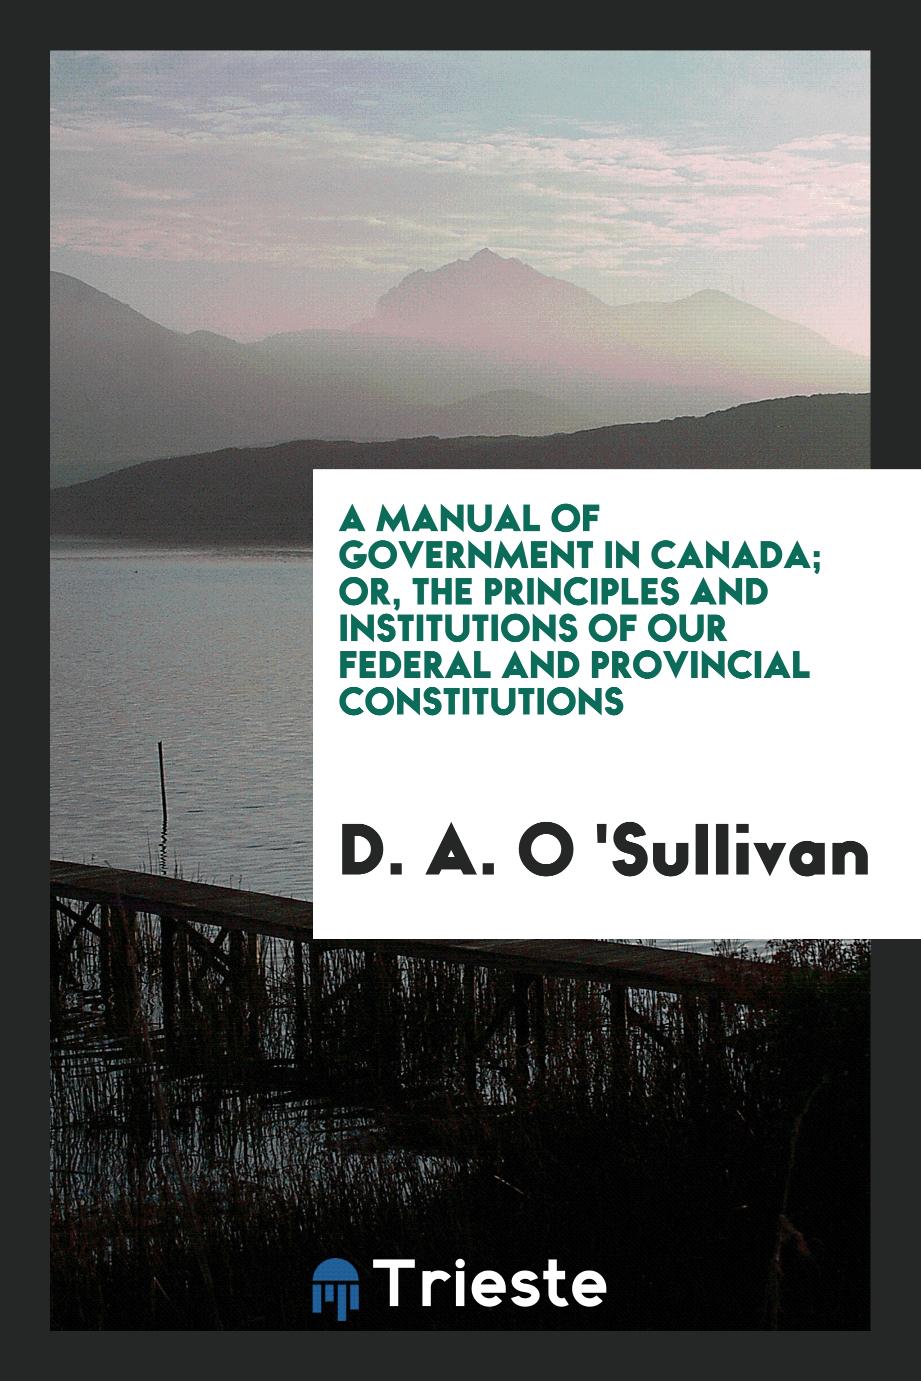 A Manual of Government in Canada; Or, The Principles and Institutions of Our Federal and Provincial Constitutions